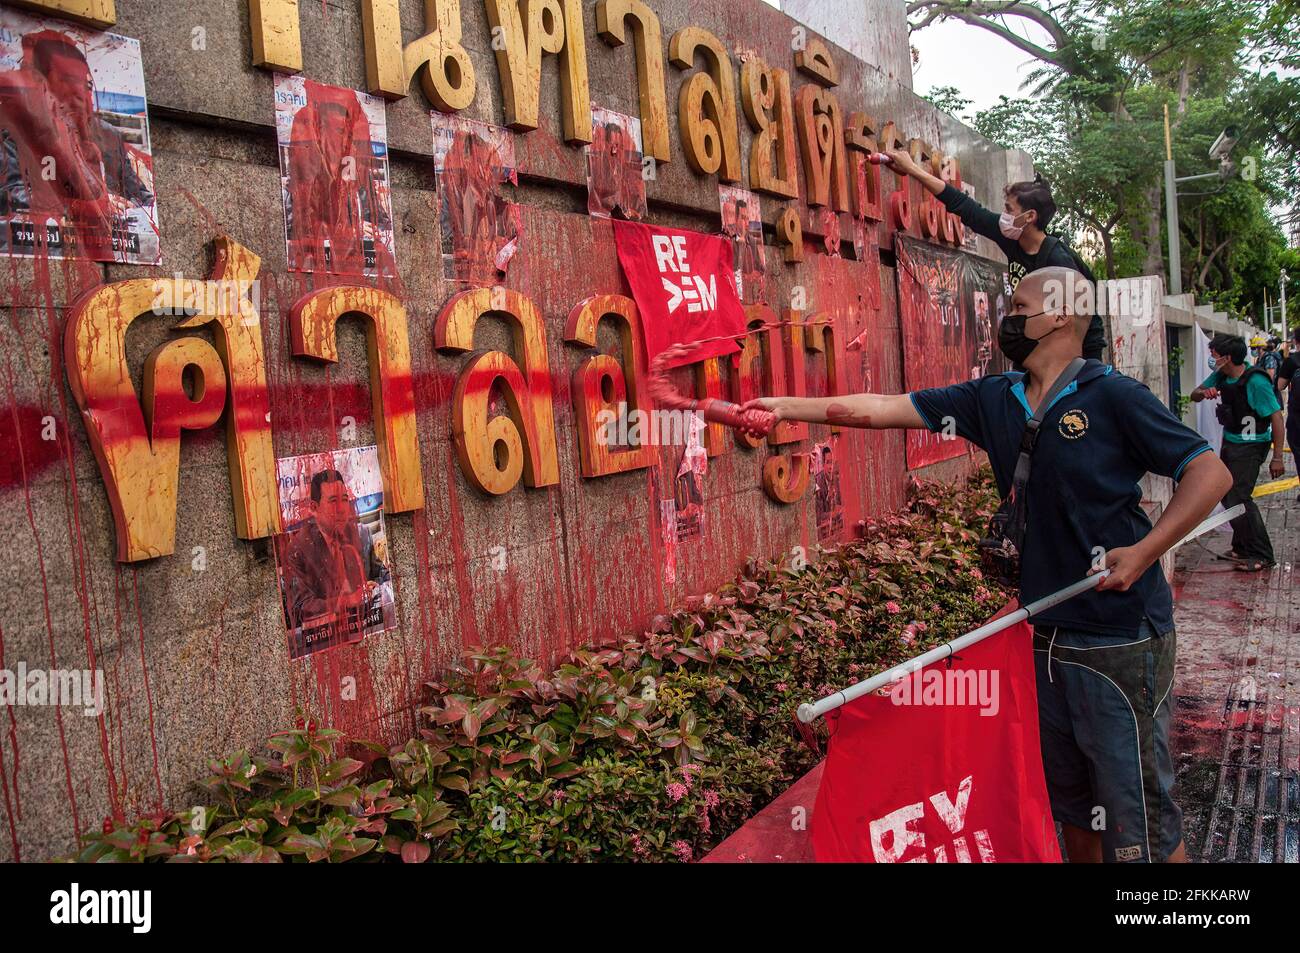 A protester splashes paint at the Criminal Court sign during the demonstration. The pro-democracy protesters led by 'REDEM' group gather at the Victory Monument before going by vehicle to the Criminal Court of Thailand to demand the release of detained pro-democracy activists who were detained by the lese majeste law (article 112 of the Thai criminal code). (Photo by Peerapon Boonyakiat / SOPA Image/Sipa USA) Stock Photo